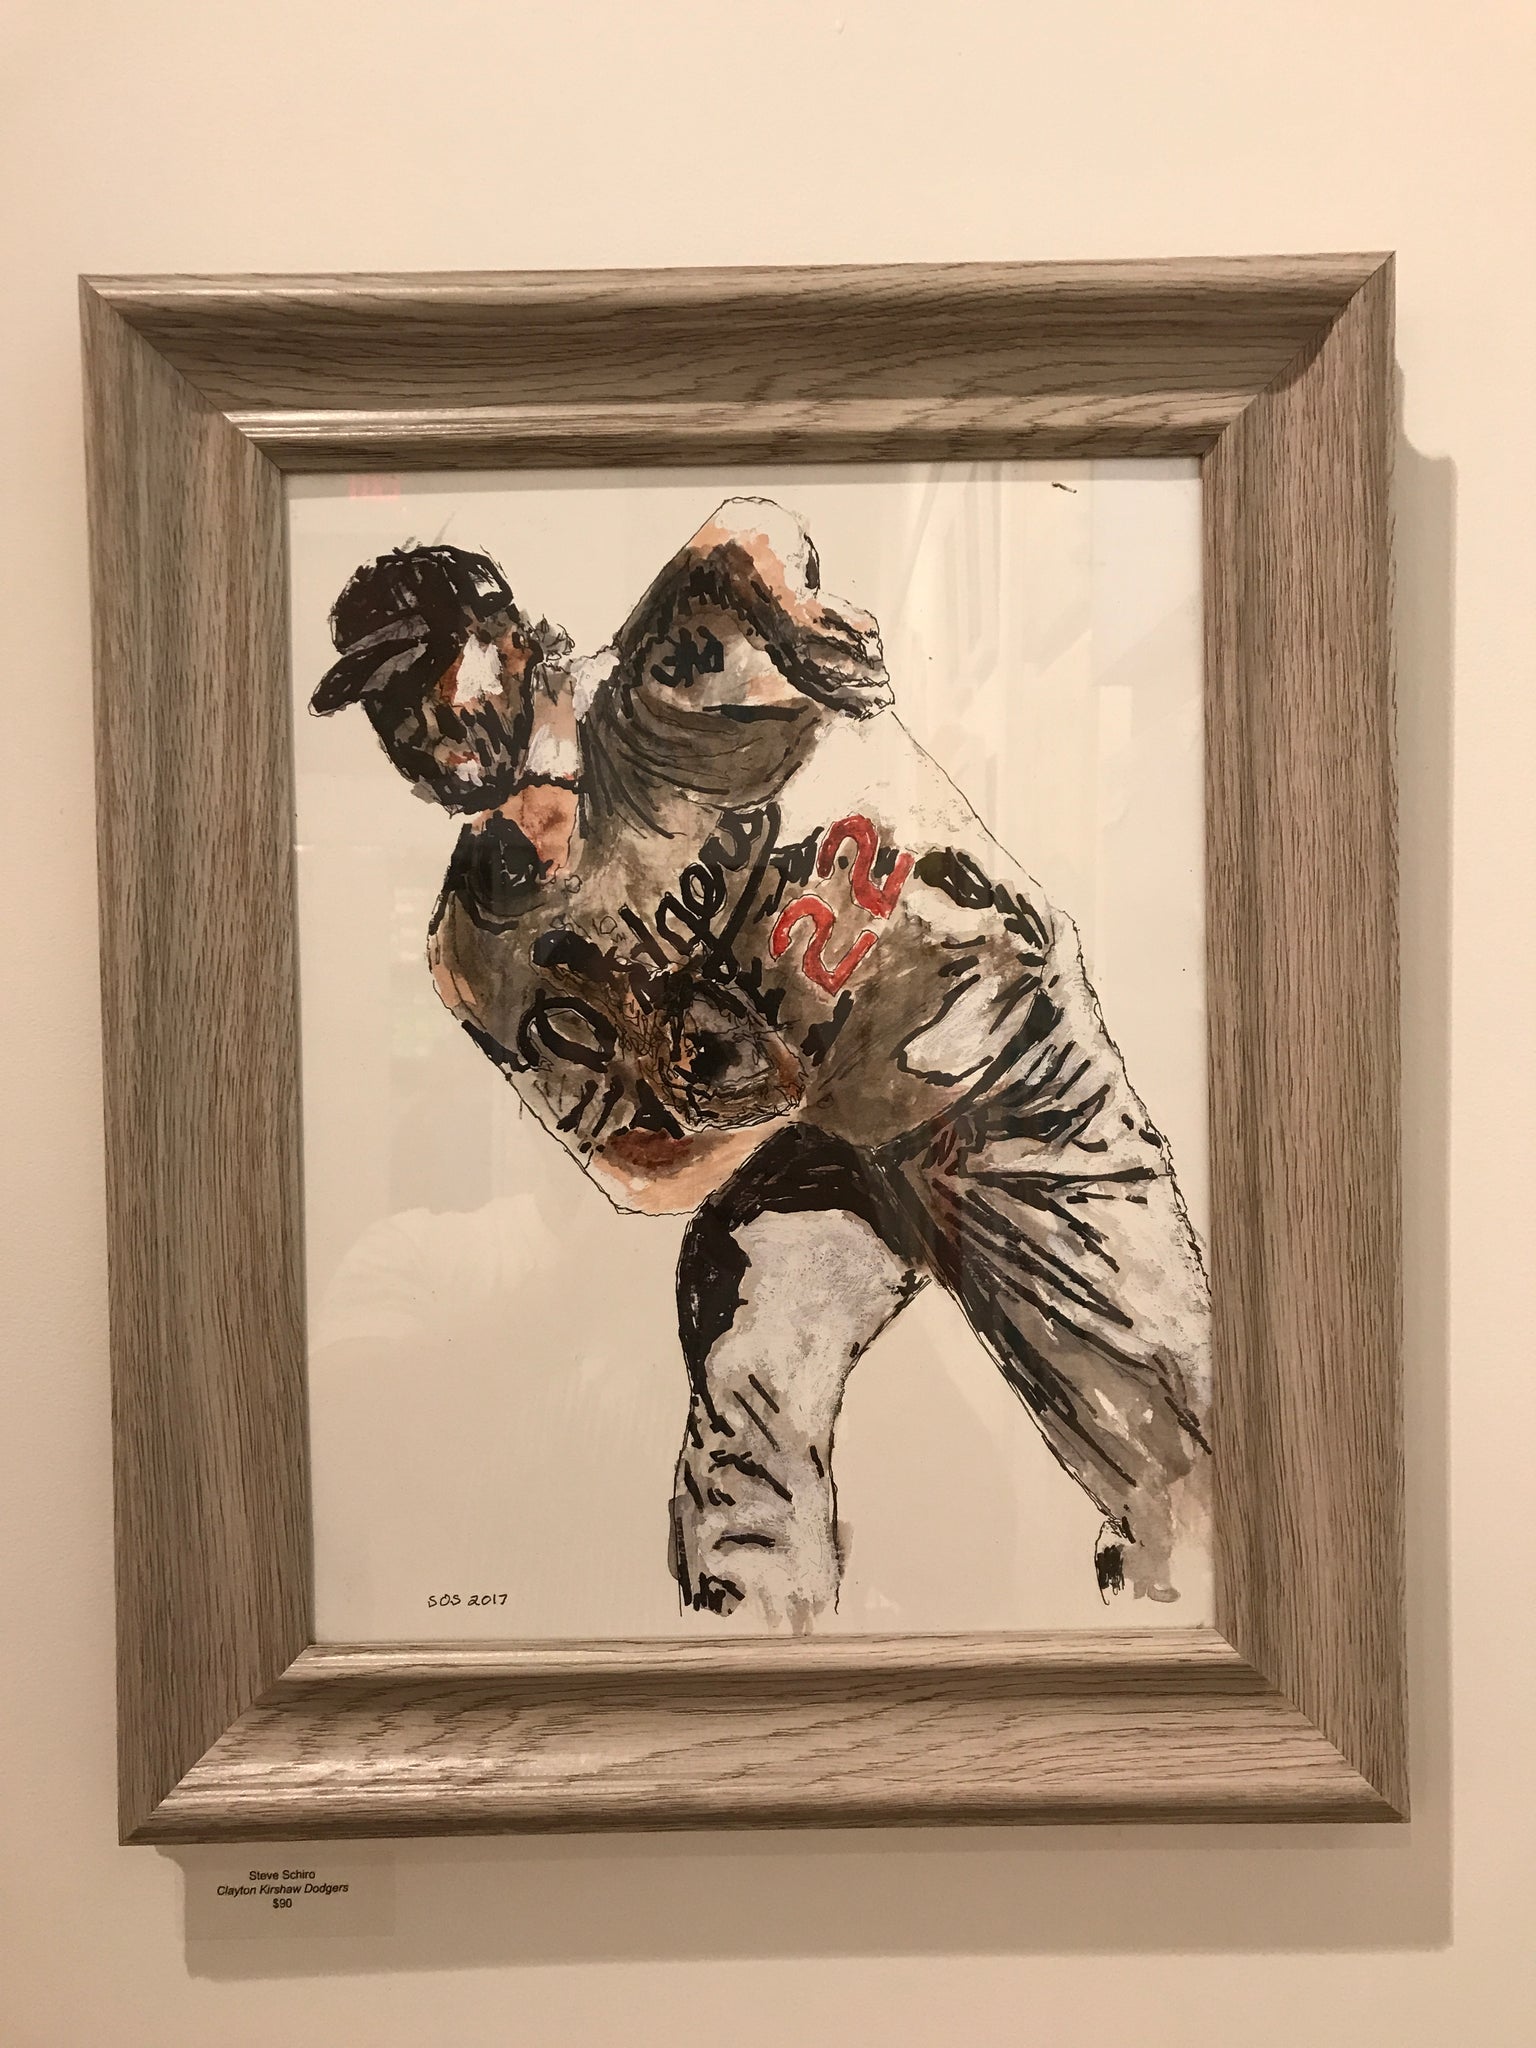 Clayton Kershaw Dodger #22 - Red Bank Artisan Collective jewelry art vintage recycled Sports Art, Steve Schiro